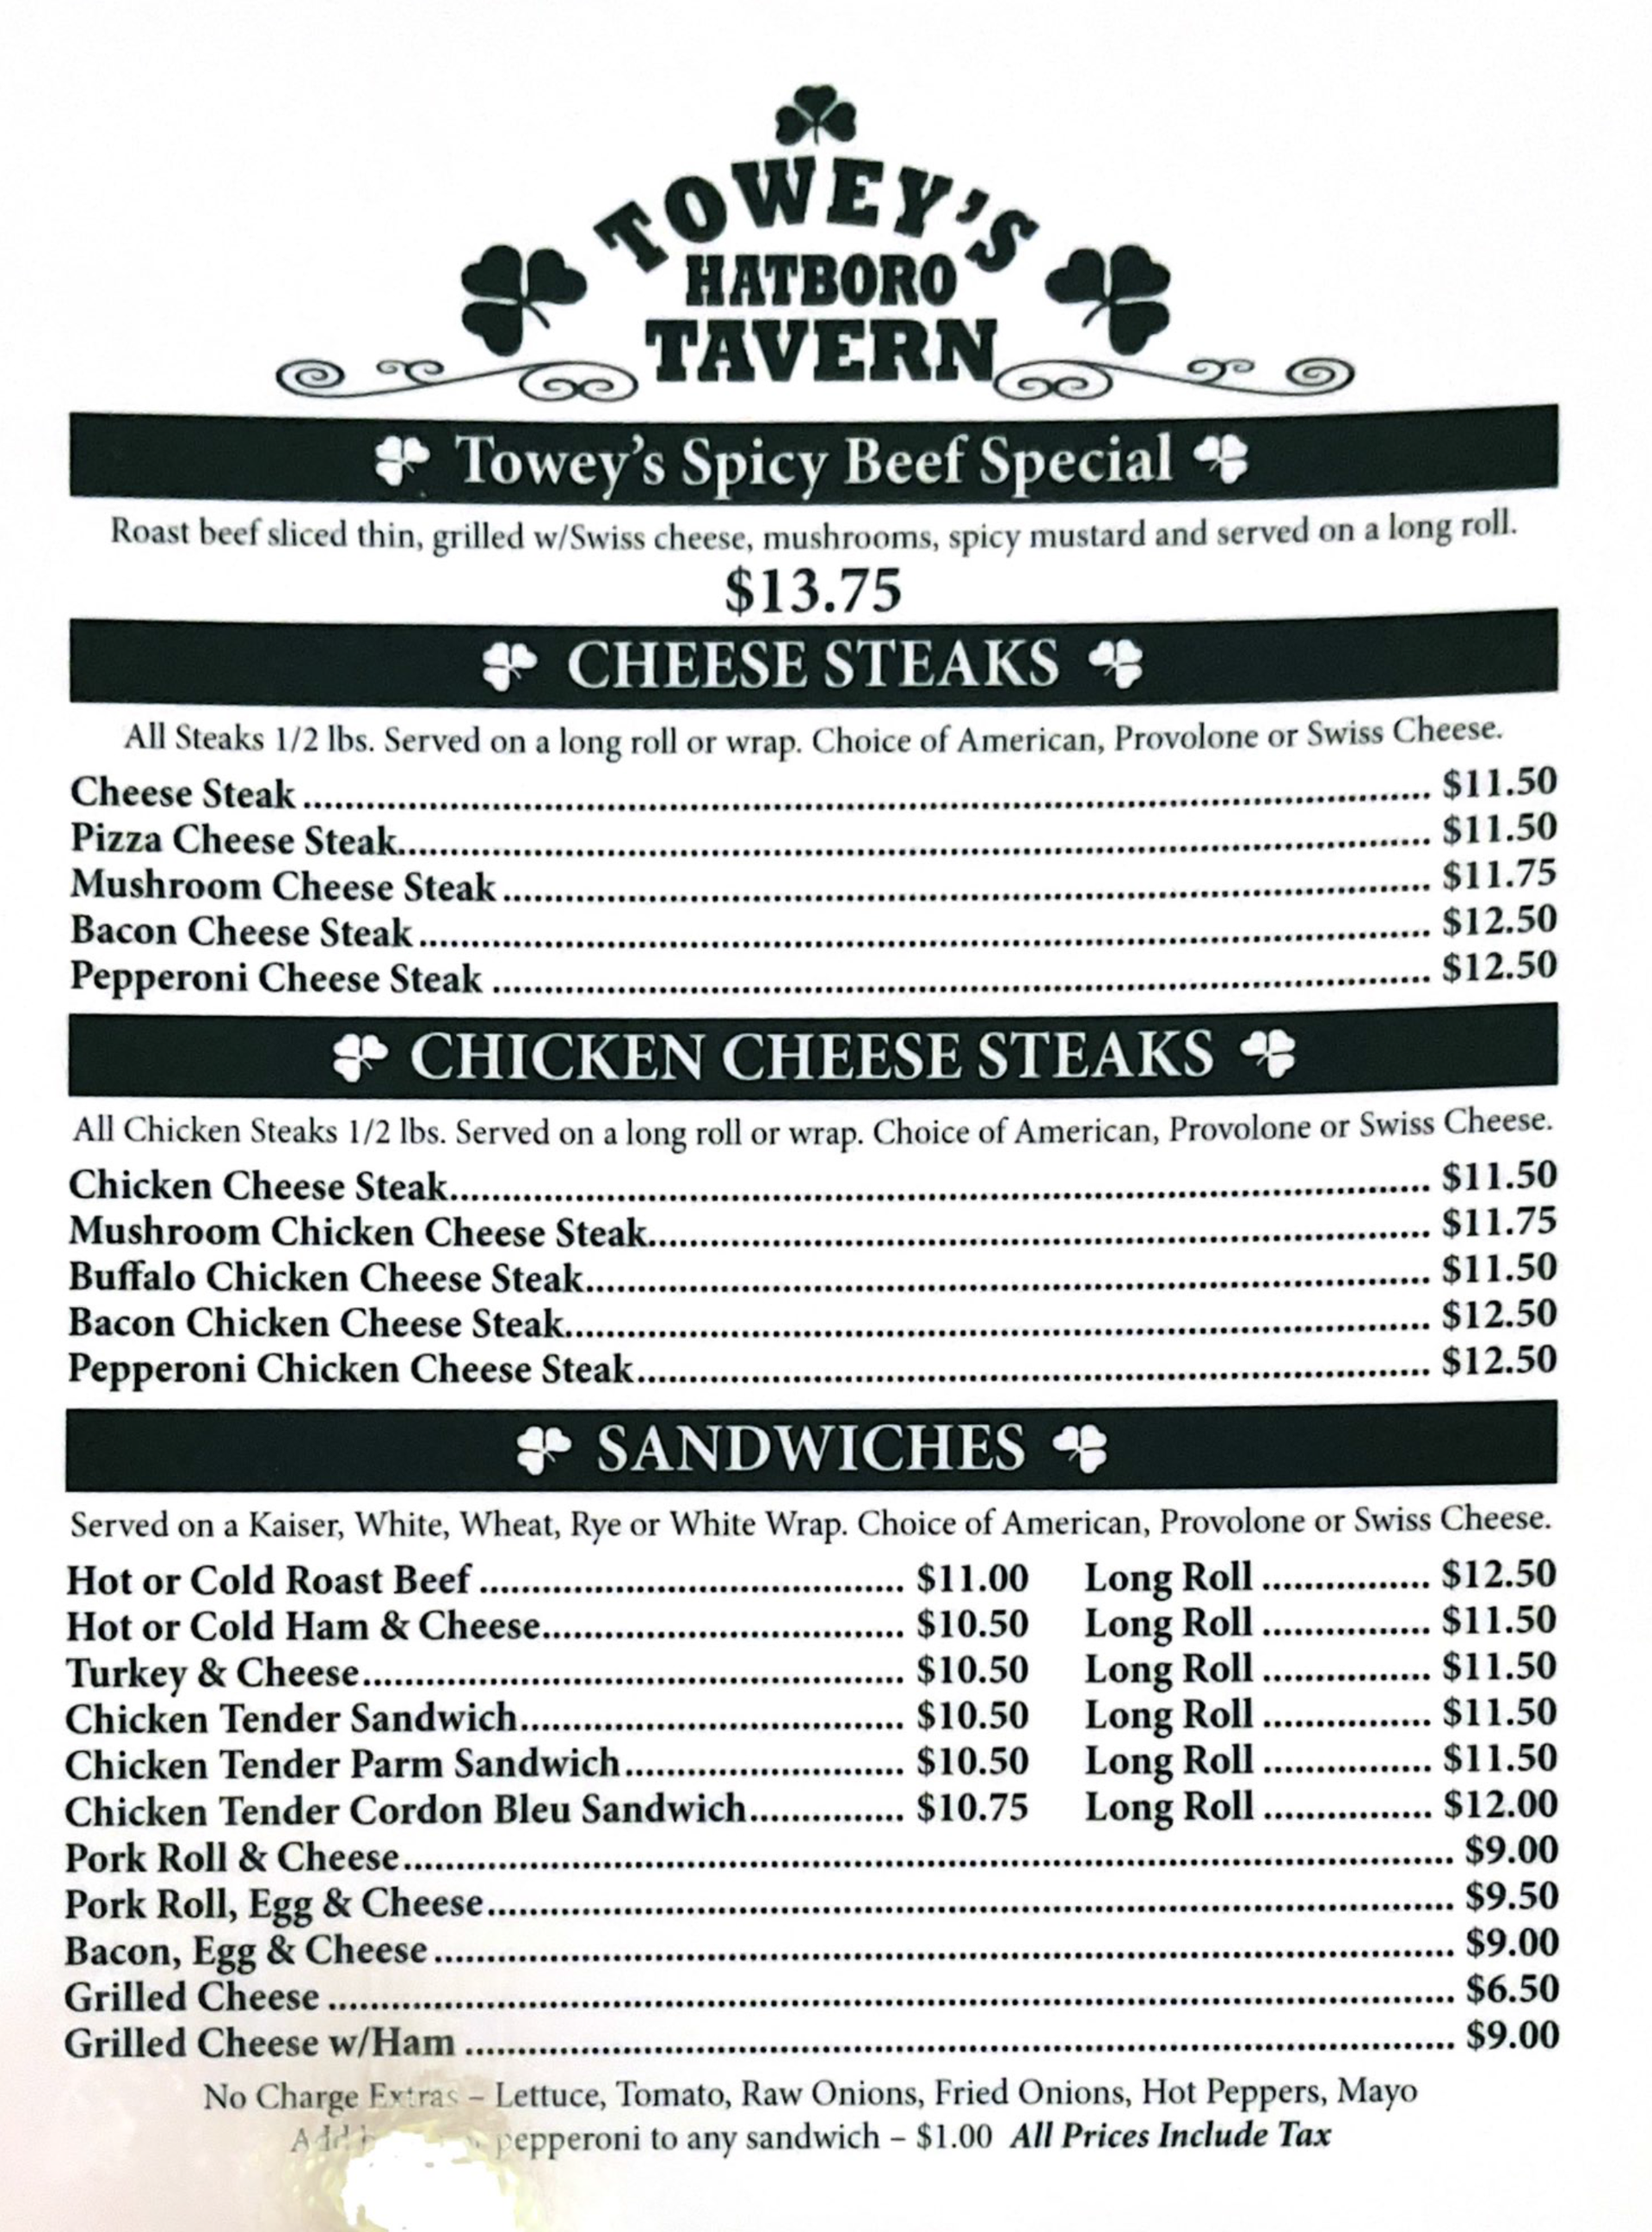 Towey's Spicy Beef Special, Cheese Steaks, & Sandwiches Menu